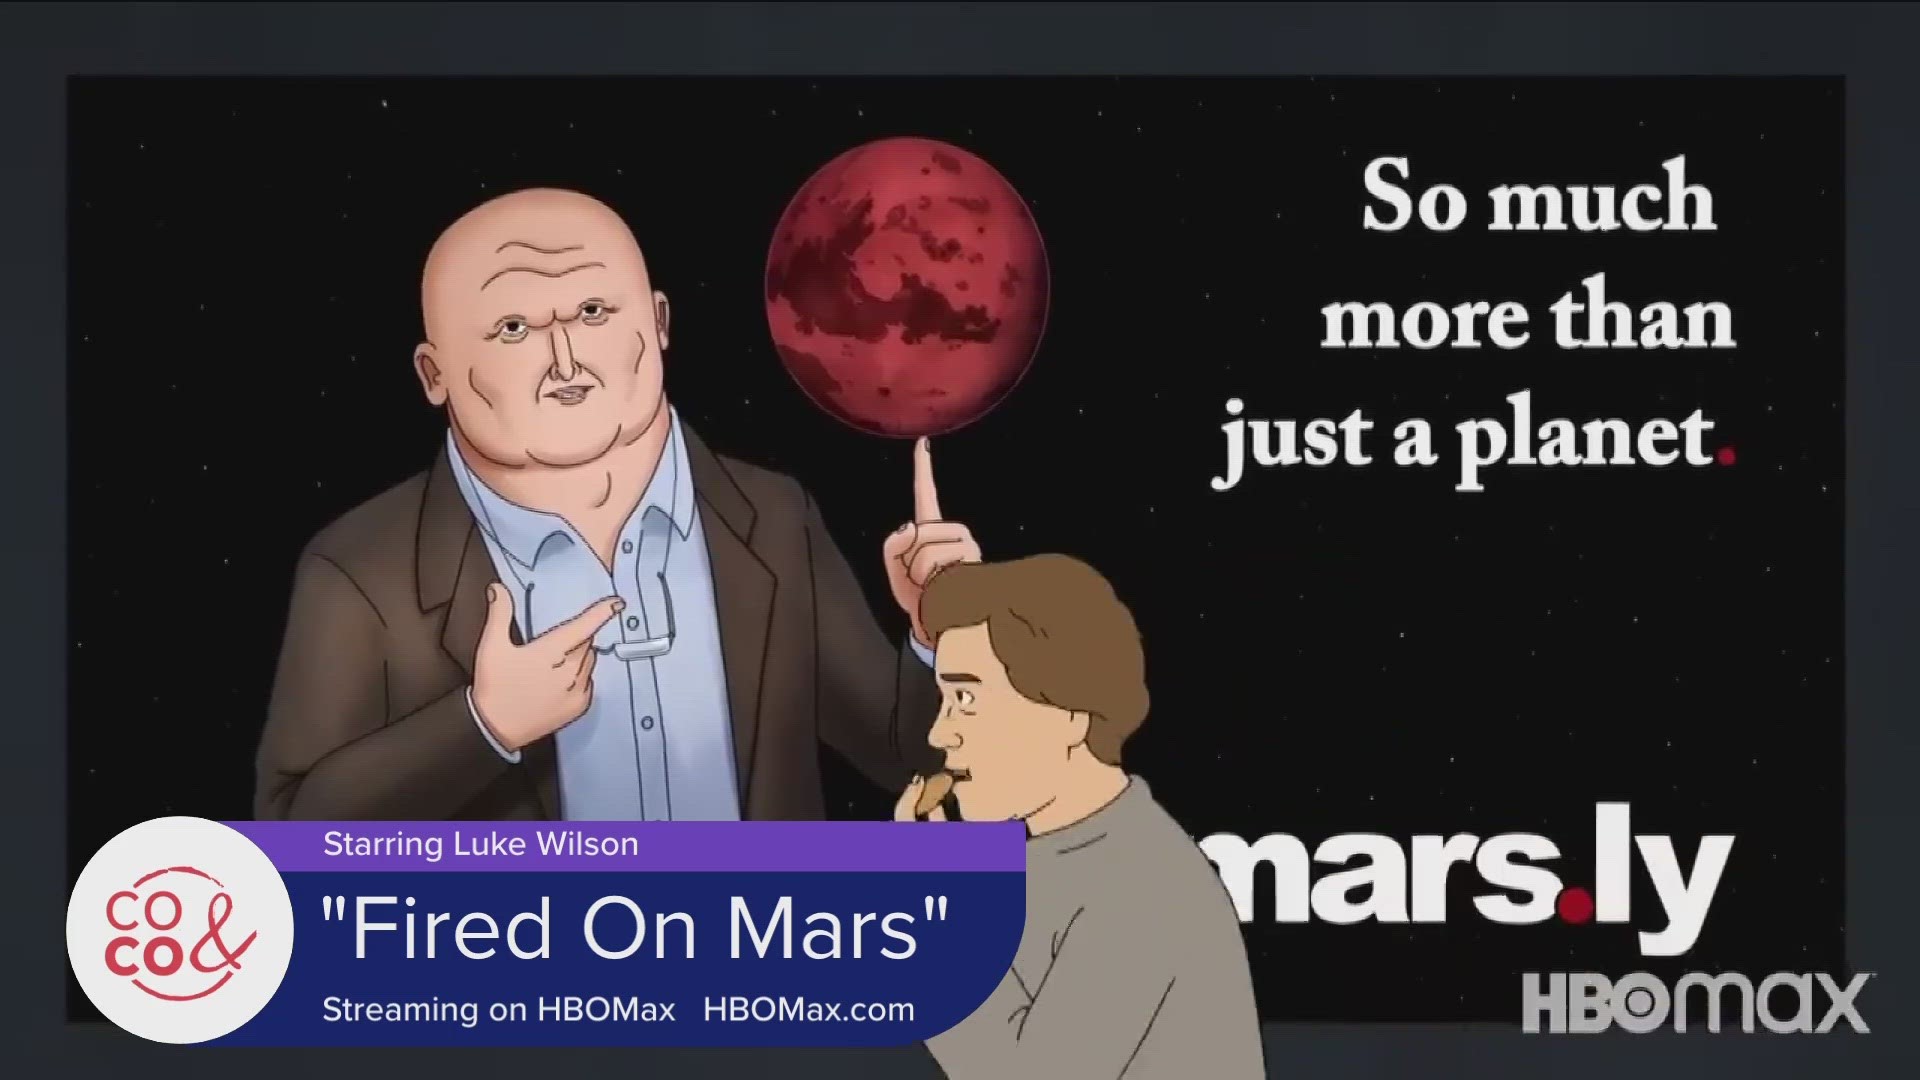 'Fired on Mars' premieres on HBO Max tonight.